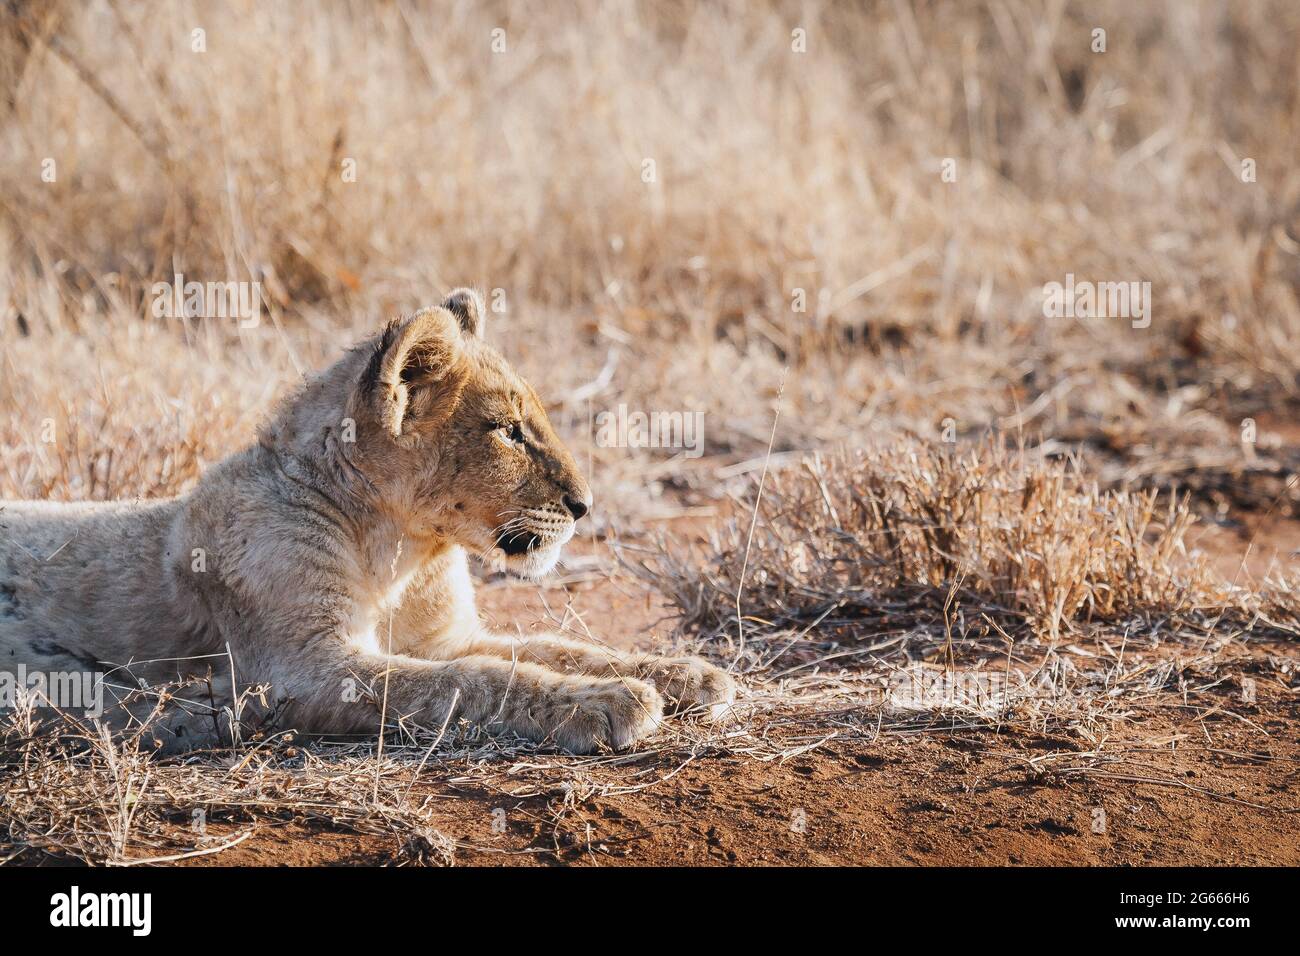 Animals in the wild - lion cub in Kruger National Park, South Africa Stock Photo